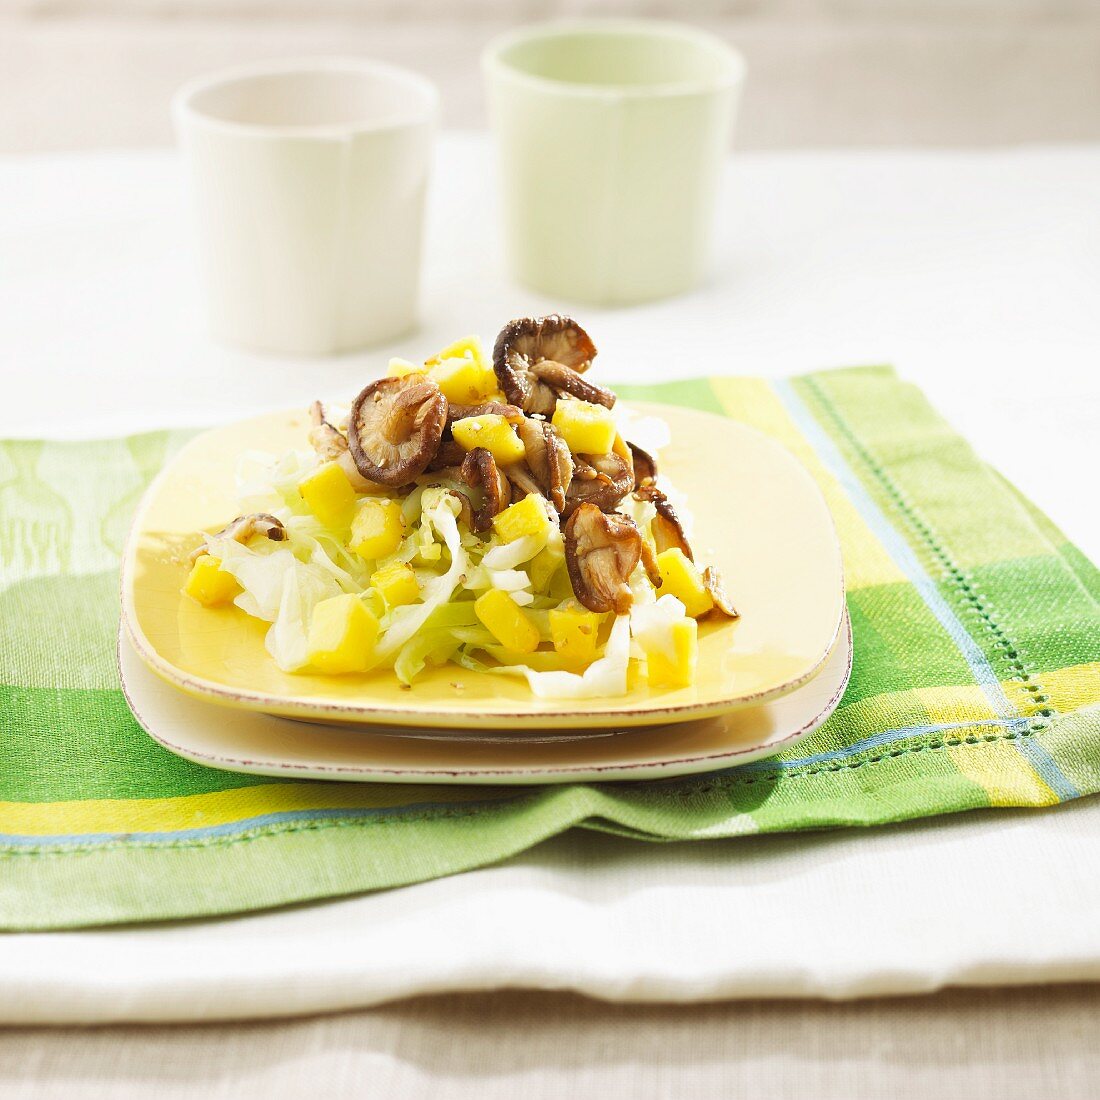 Stir-fried pointed cabbage with shiitake mushrooms and mango